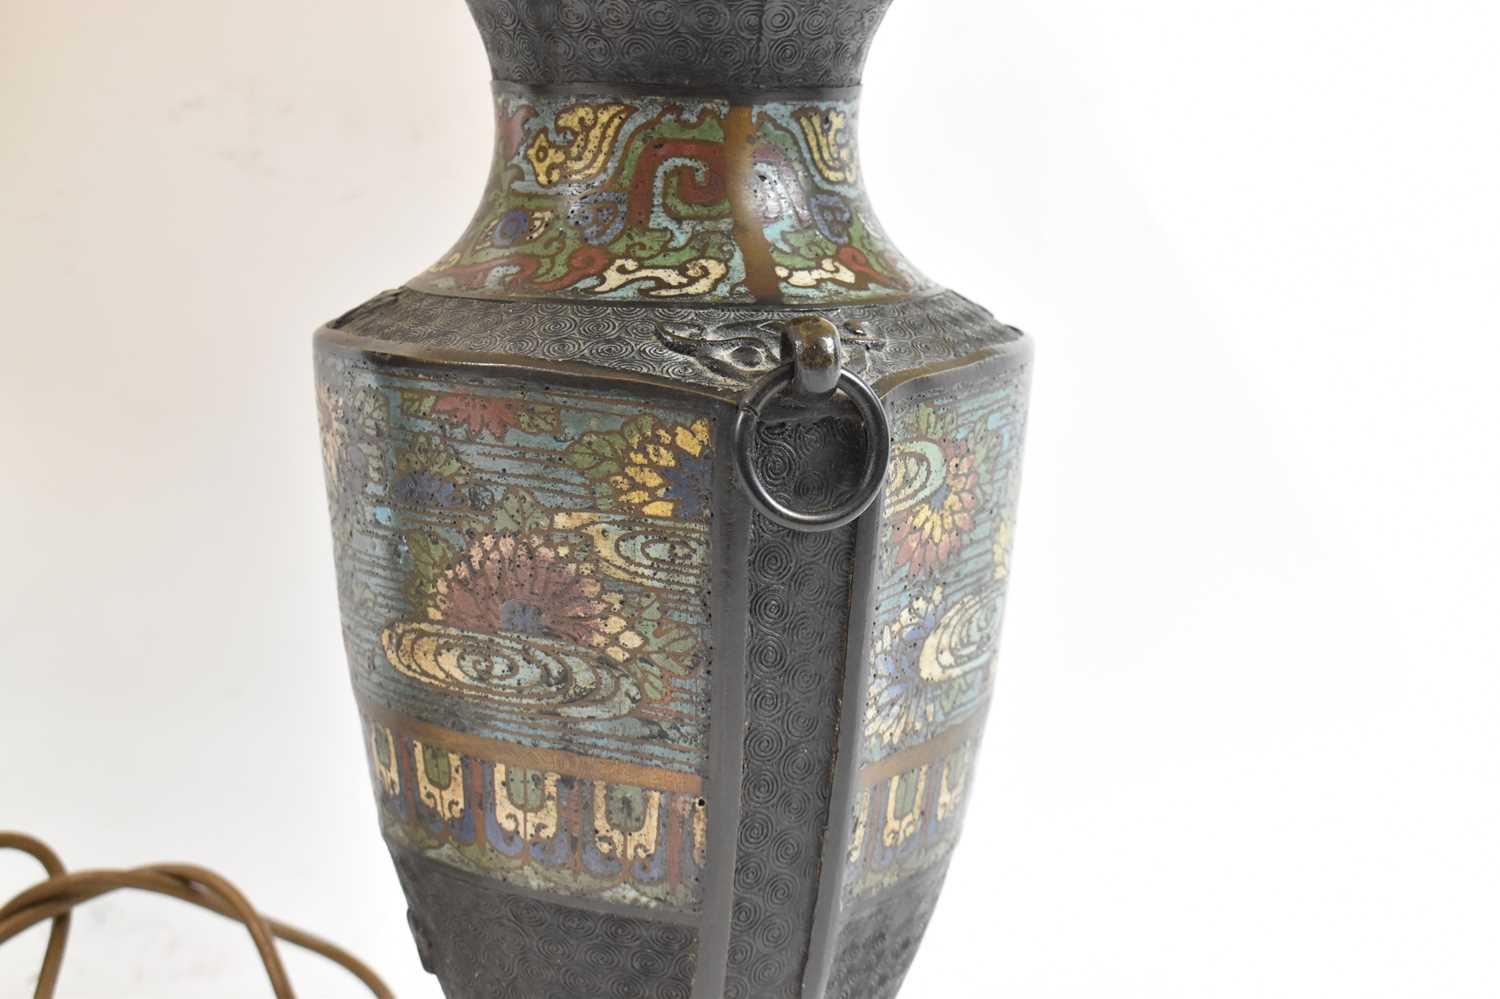 A pair of 19th century Japanese bronze and enamel temple jars converted to table lamps, height 33cm, - Image 3 of 3